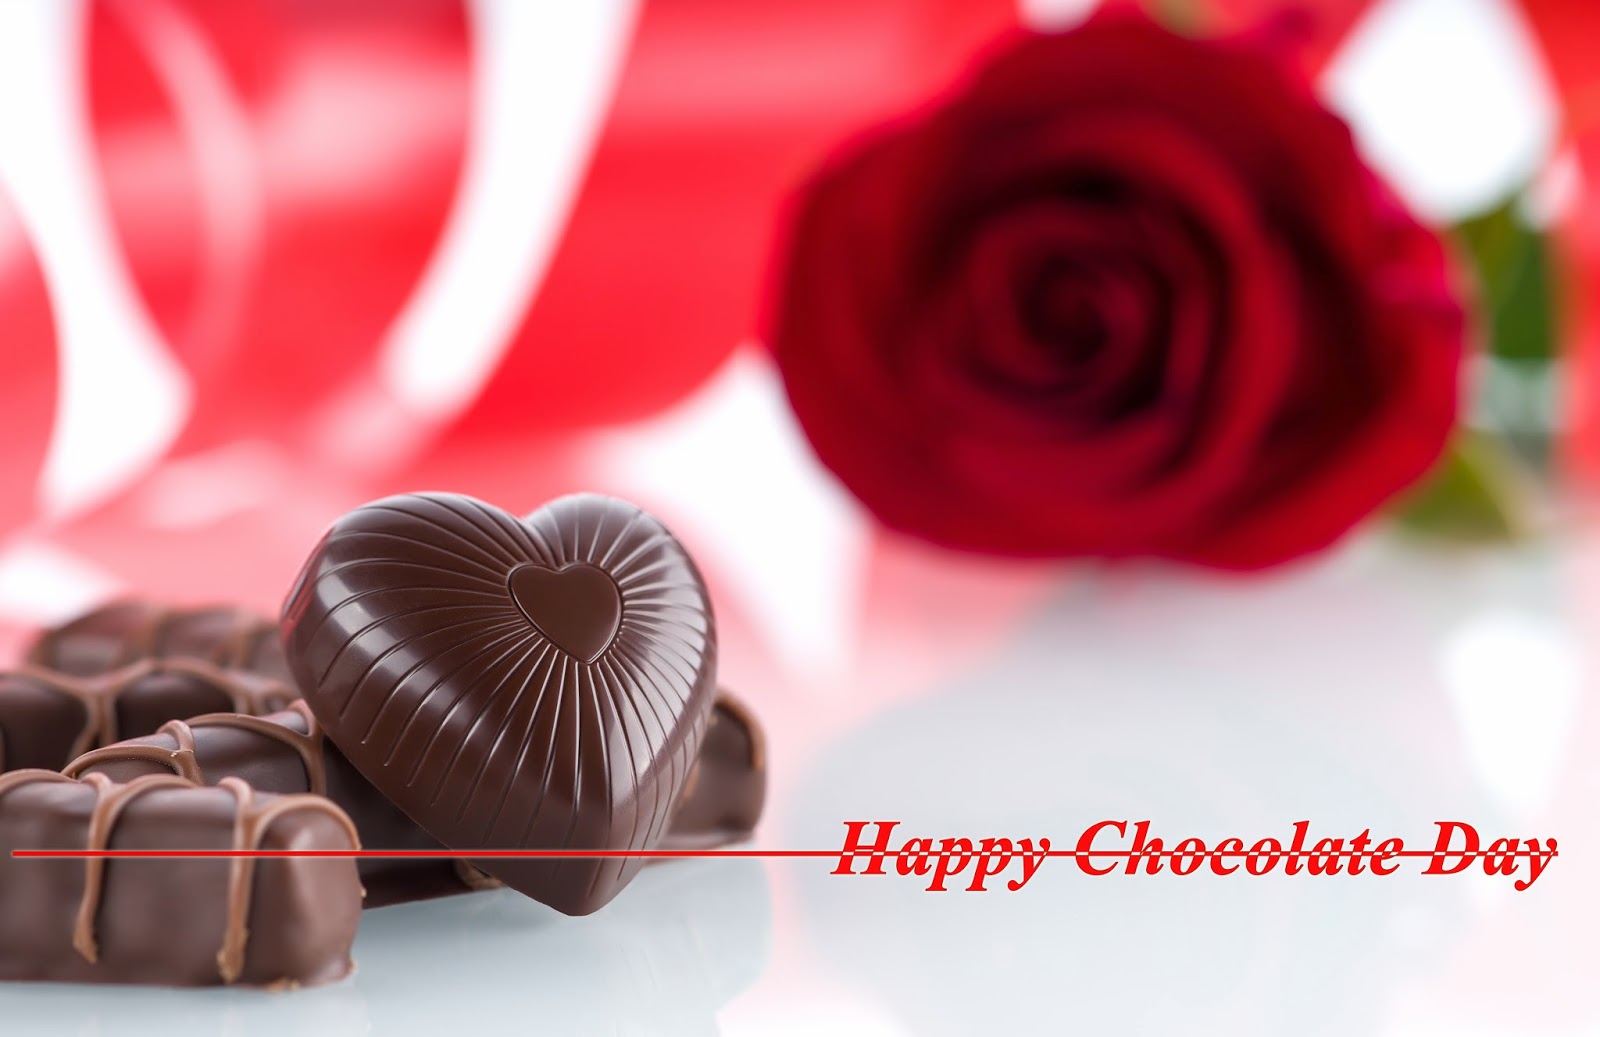 Happy Chocolate Day Wallpaper Hd - Happy Chocolate Day 2016 , HD Wallpaper & Backgrounds